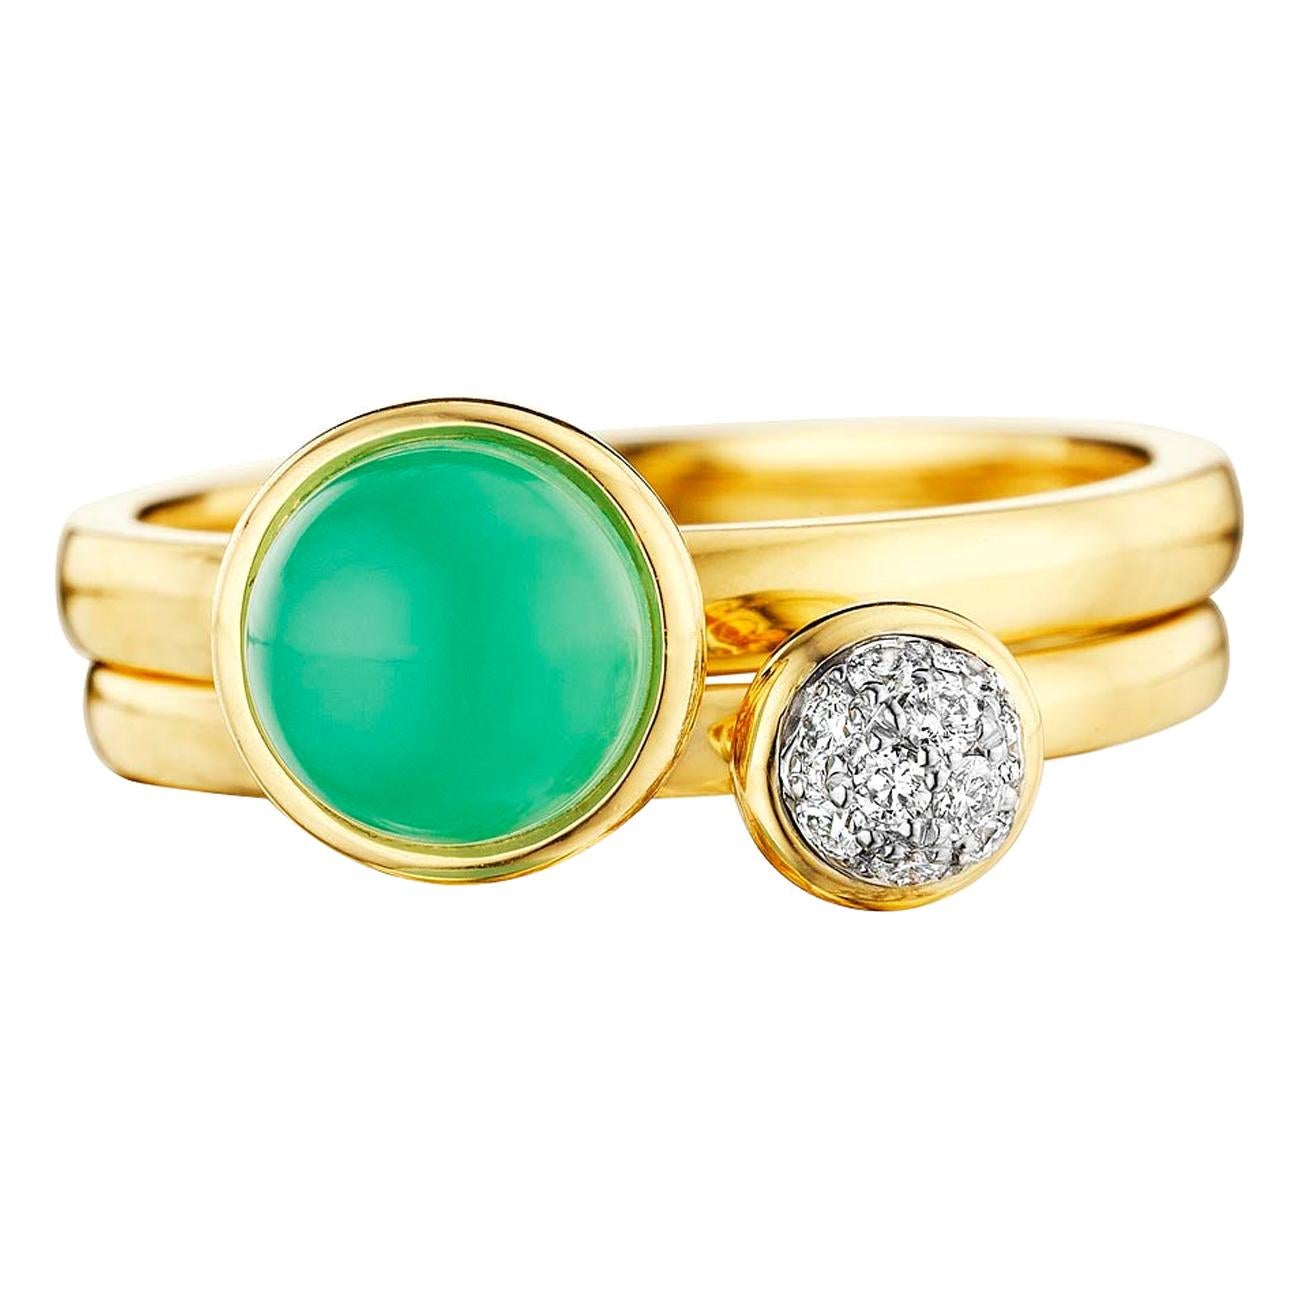 Syna Yellow Gold Pair of Stacking Rings with Chrysoprase and Diamonds